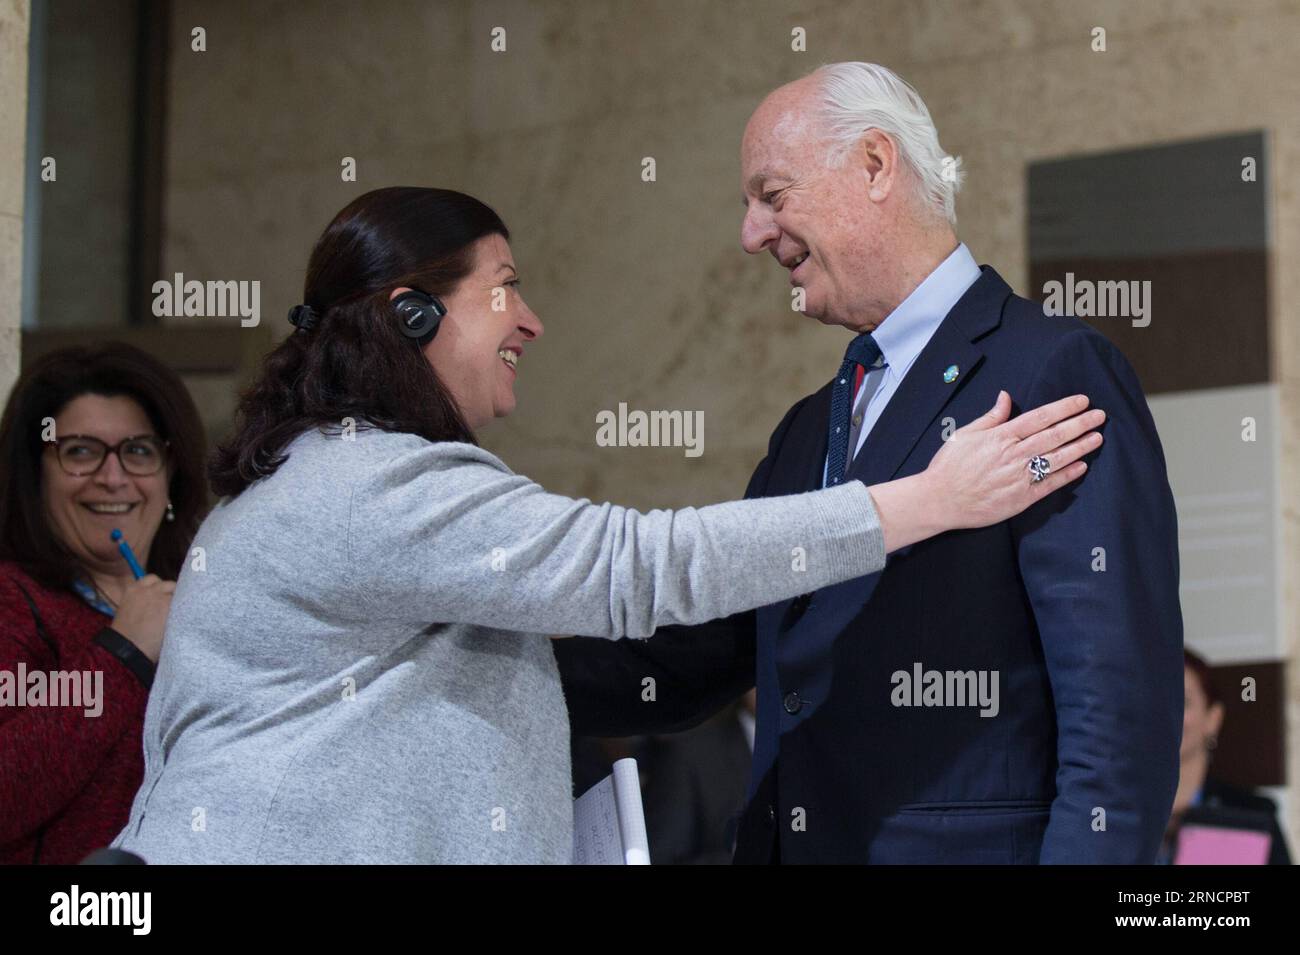 (169418) -- GENEVA, April 18, 2016 -- UN Special Envoy for Syria Staffan de Mistura (R) expresses his apologies to an interpreter for his using long sentences during a press conference in Geneva, Switzerland, April 18, 2016. UN Special Envoy for Syria Staffan de Mistura on Monday said that the main Syrian opposition delegation, the High Negotiation Committee or HNC, is intending to suspend their formal presence to the ongoing peace talks in the UN headquarters of the Palace des Nations, but will remain staying in Geneva for technical discussions. ) SWITZERLAND-GENEVA-SYRIA TALKS XuxJinquan PUB Stock Photo